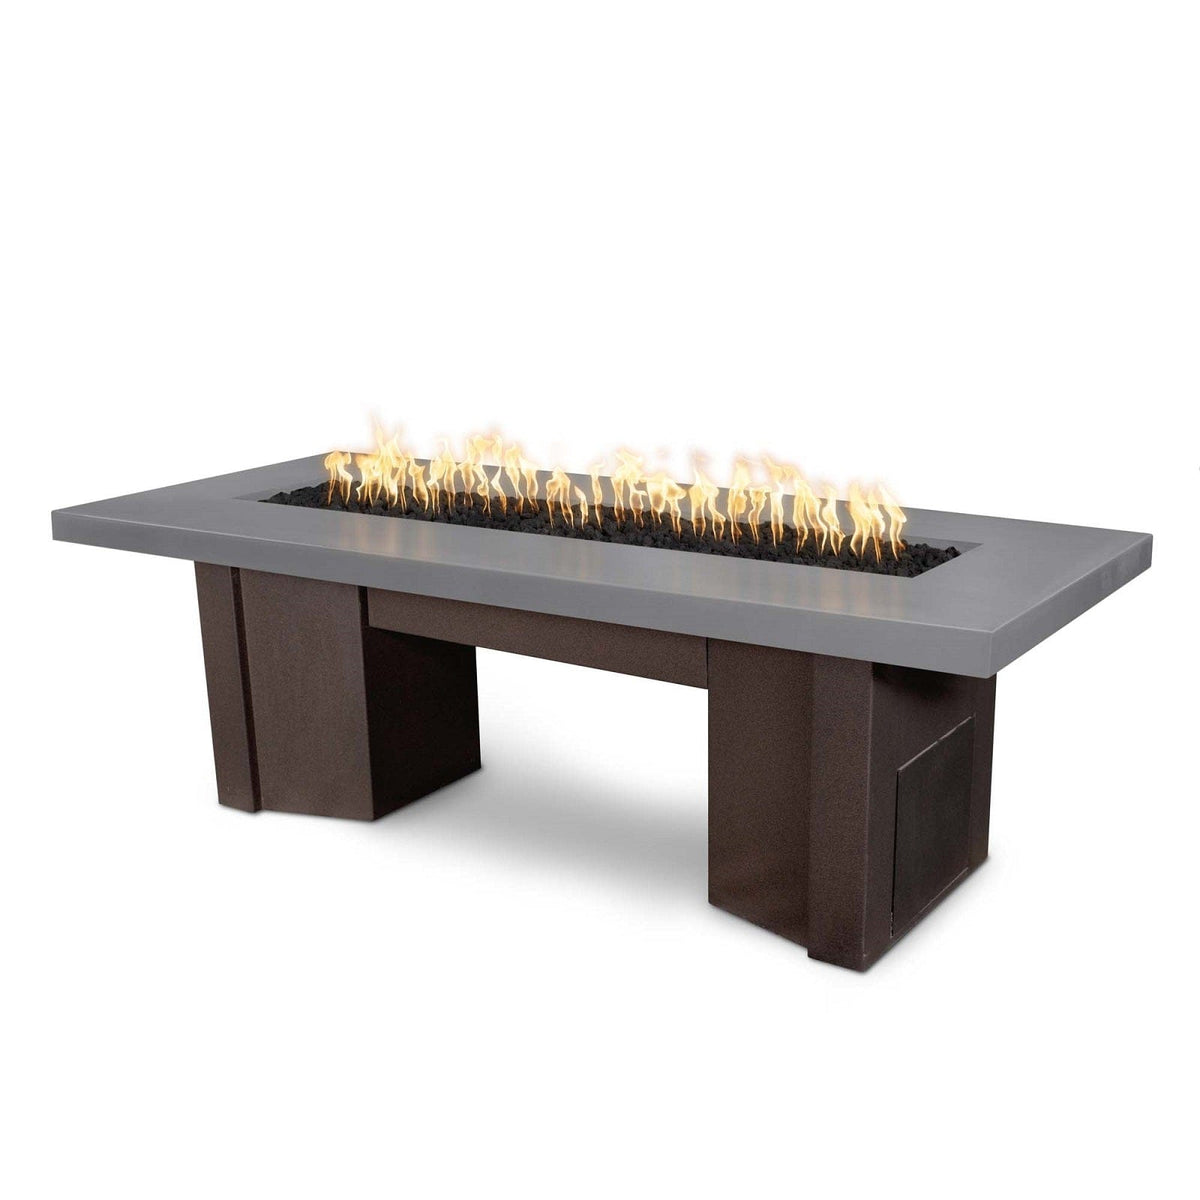 The Outdoor Plus Fire Features Natural Gray (-NGY) / Java Powder Coated Steel (-JAV) The Outdoor Plus 78&quot; Alameda Fire Table Smooth Concrete in Liquid Propane - 110V Plug &amp; Play Electronic Ignition / OPT-ALMGFRC78EKIT-LP